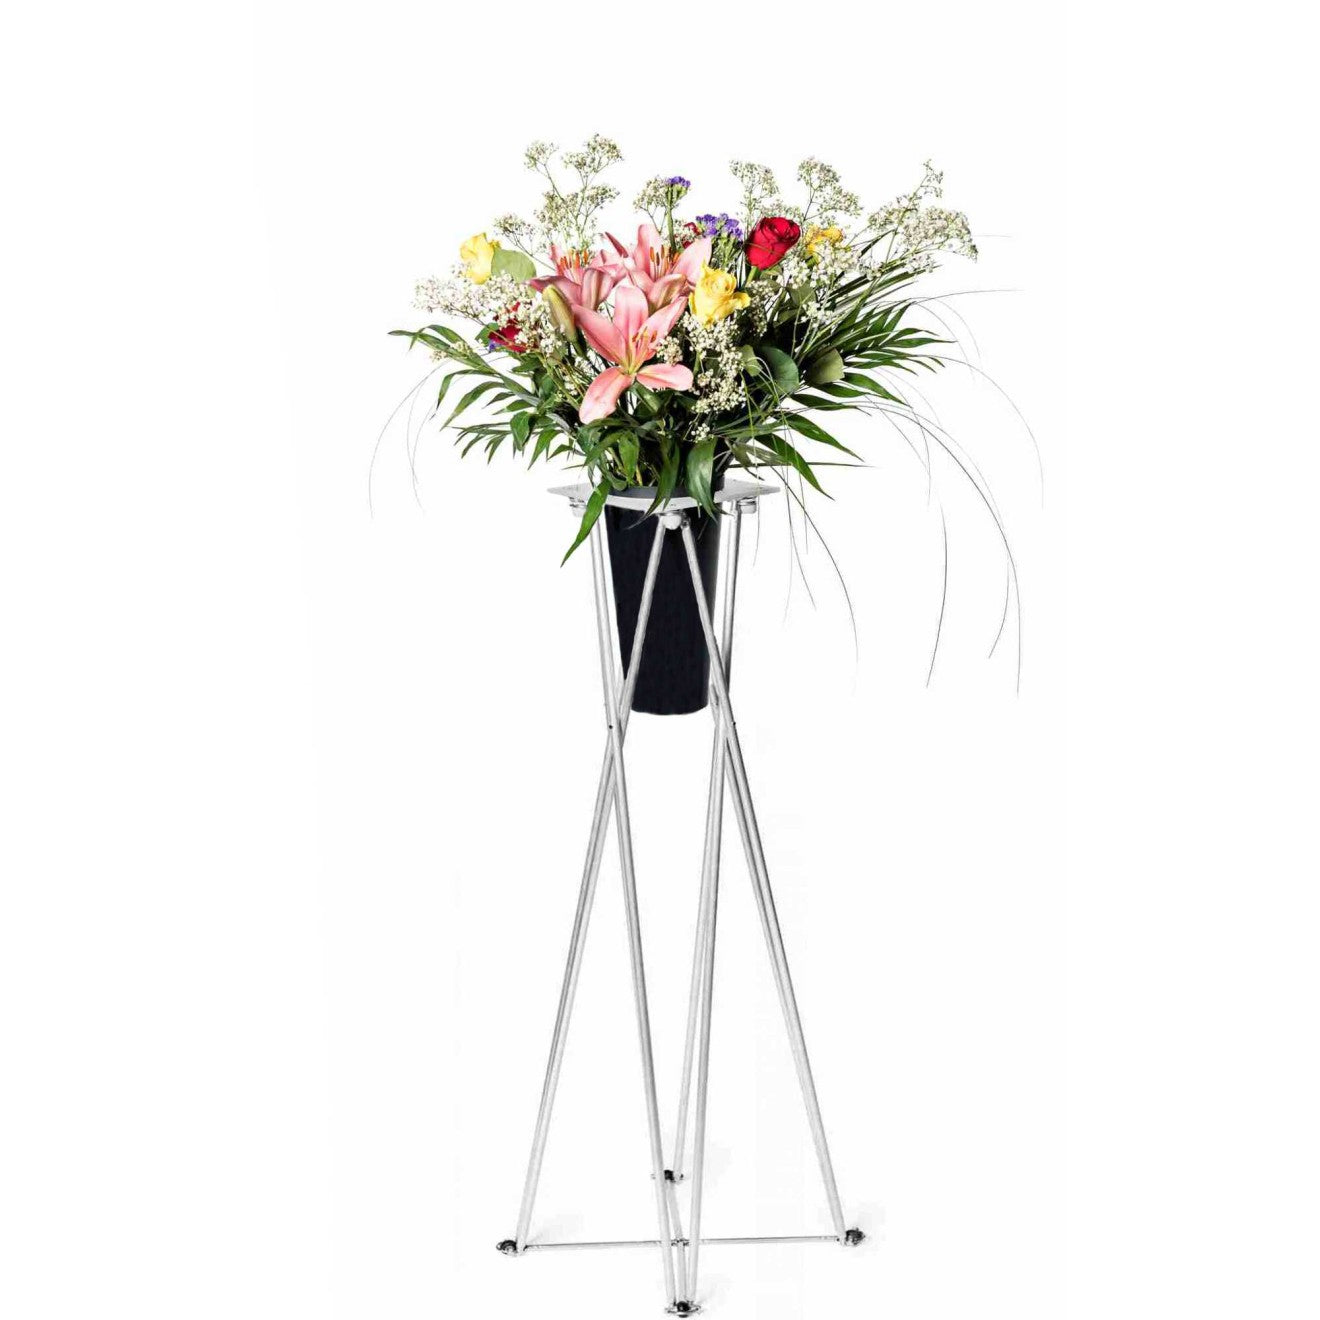 Spider stand with vase